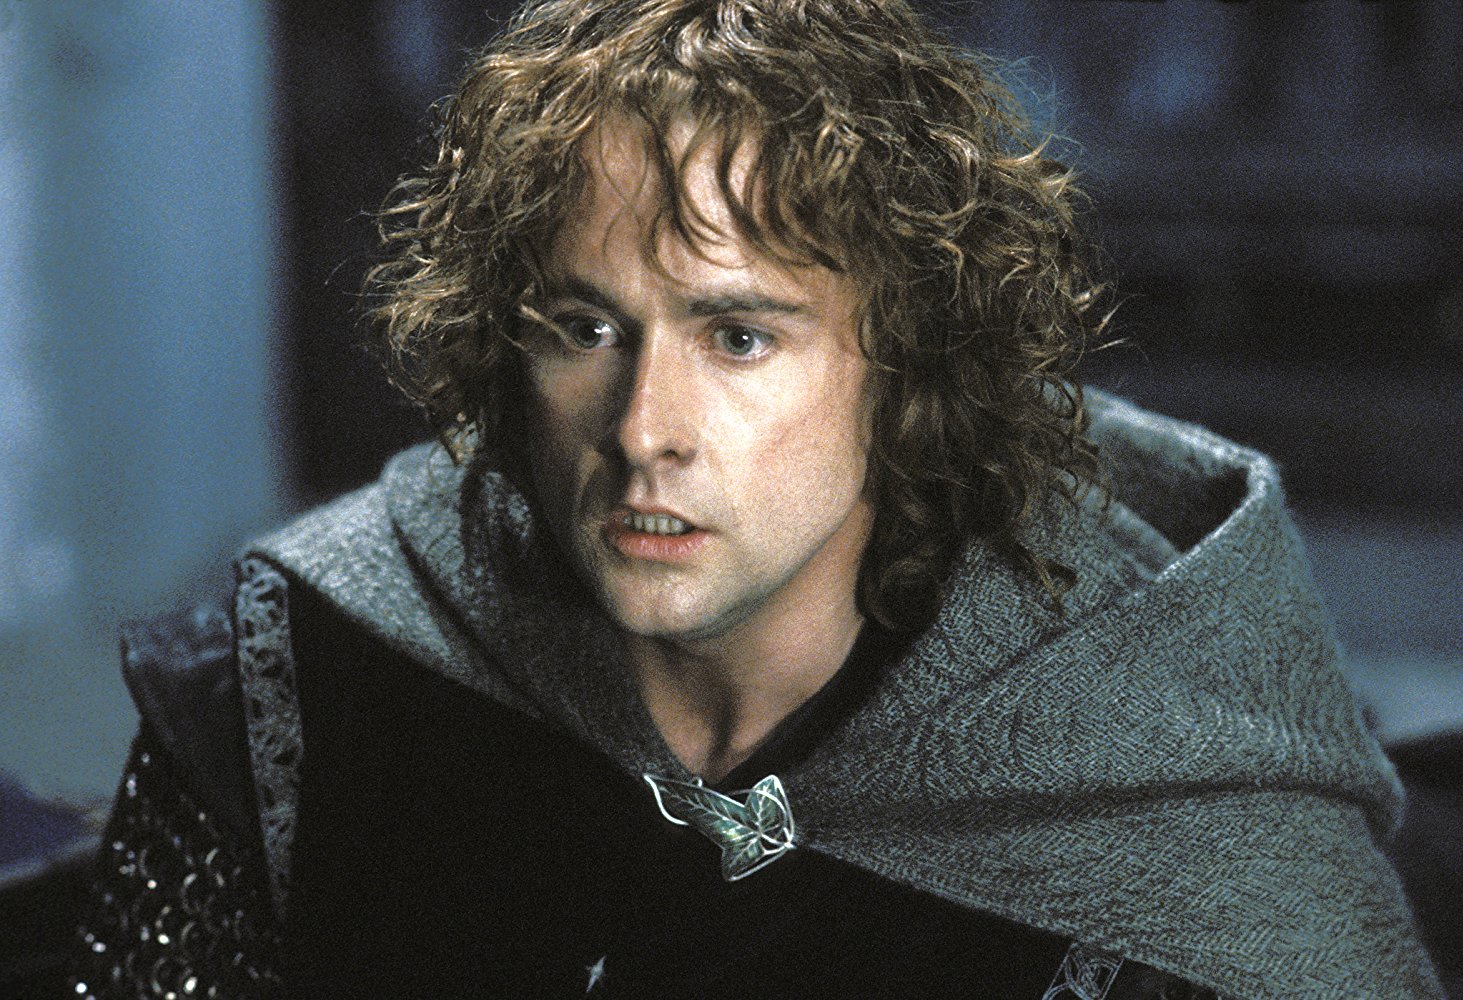 Peregrin 'Pippin' Took